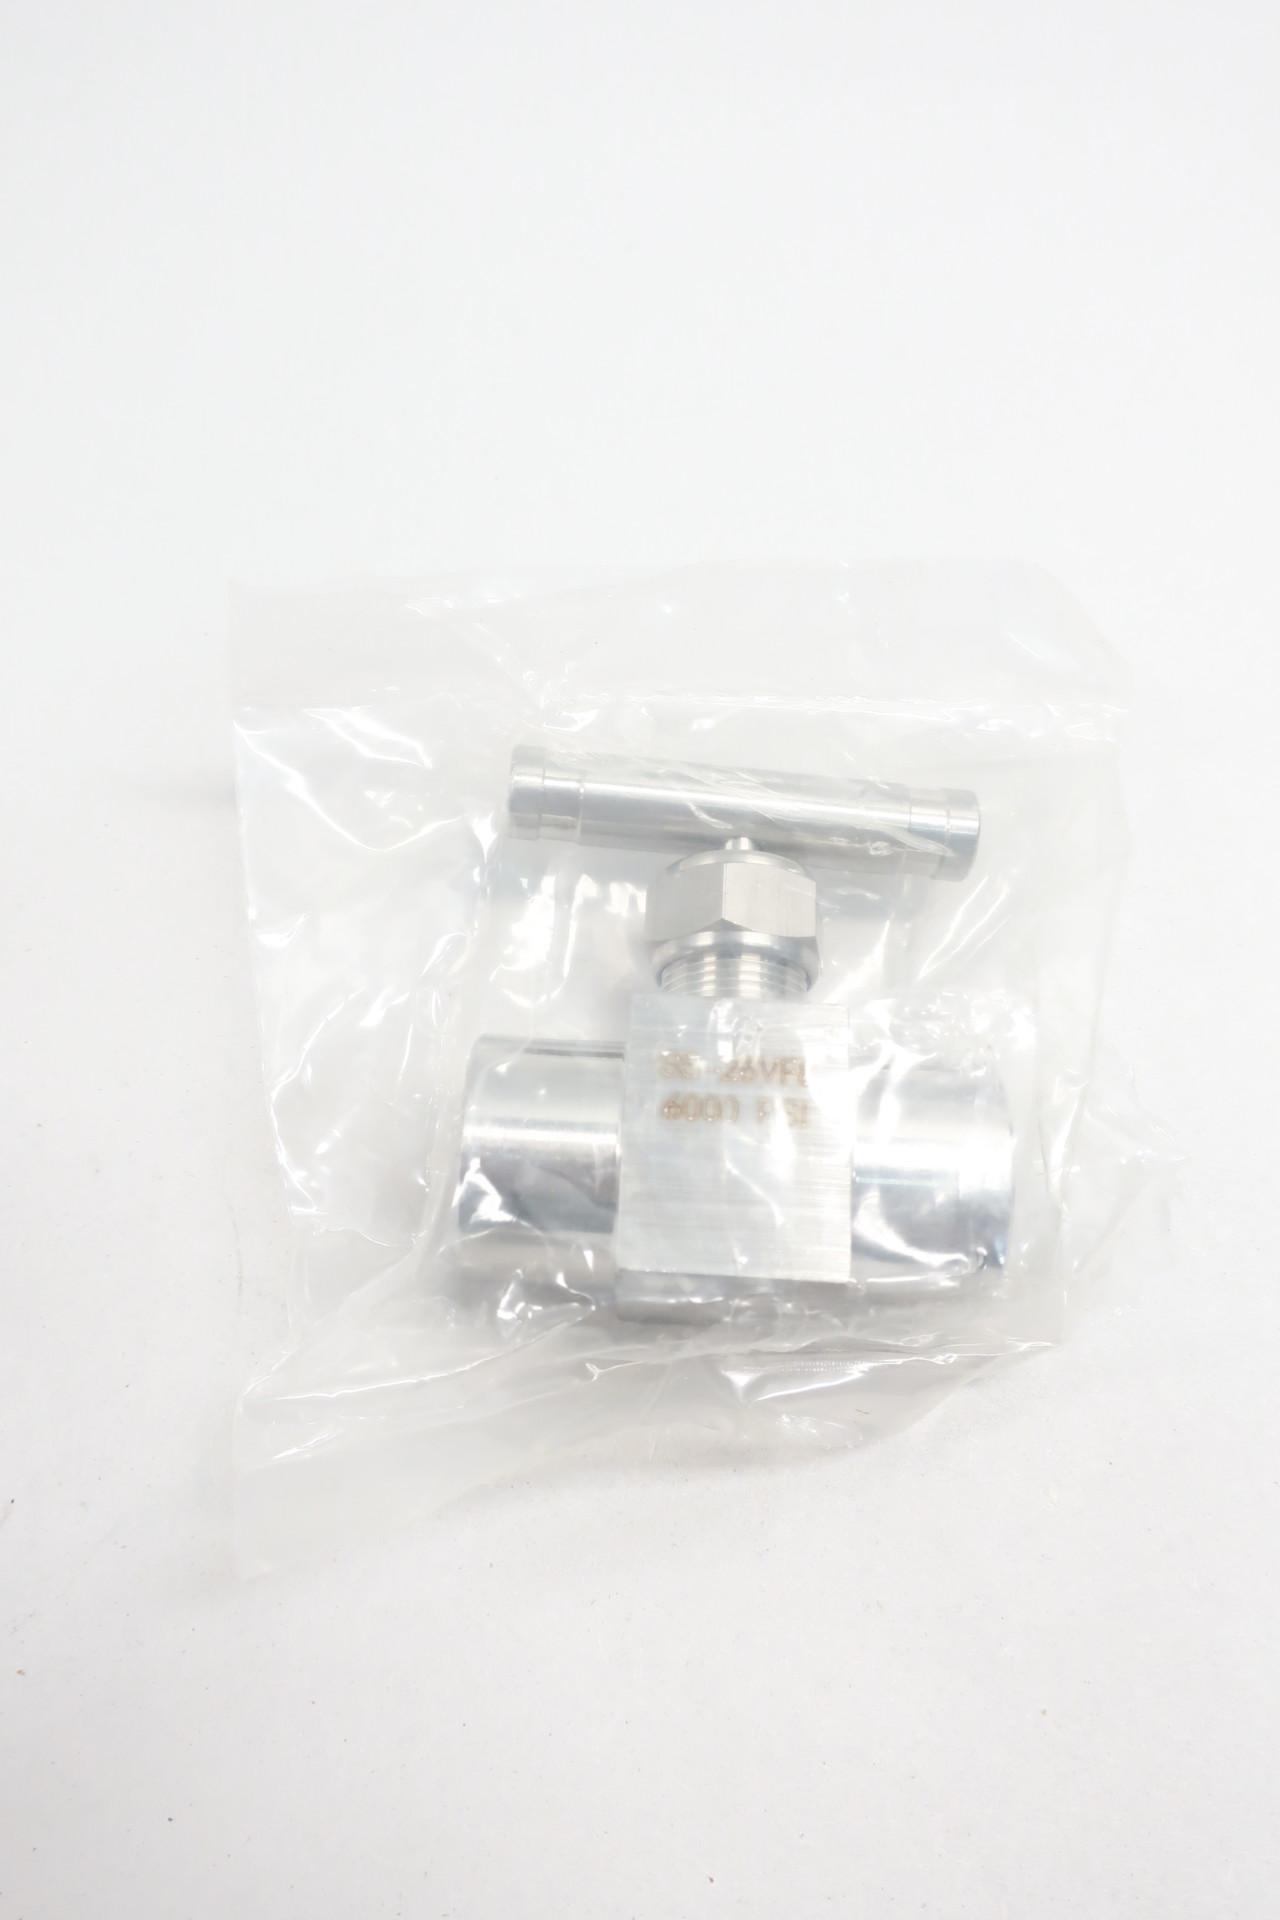 Box Of 2 Whitey SS-26VF8 Manual Stainless Needle Valve 6000psi 1/2in Npt 